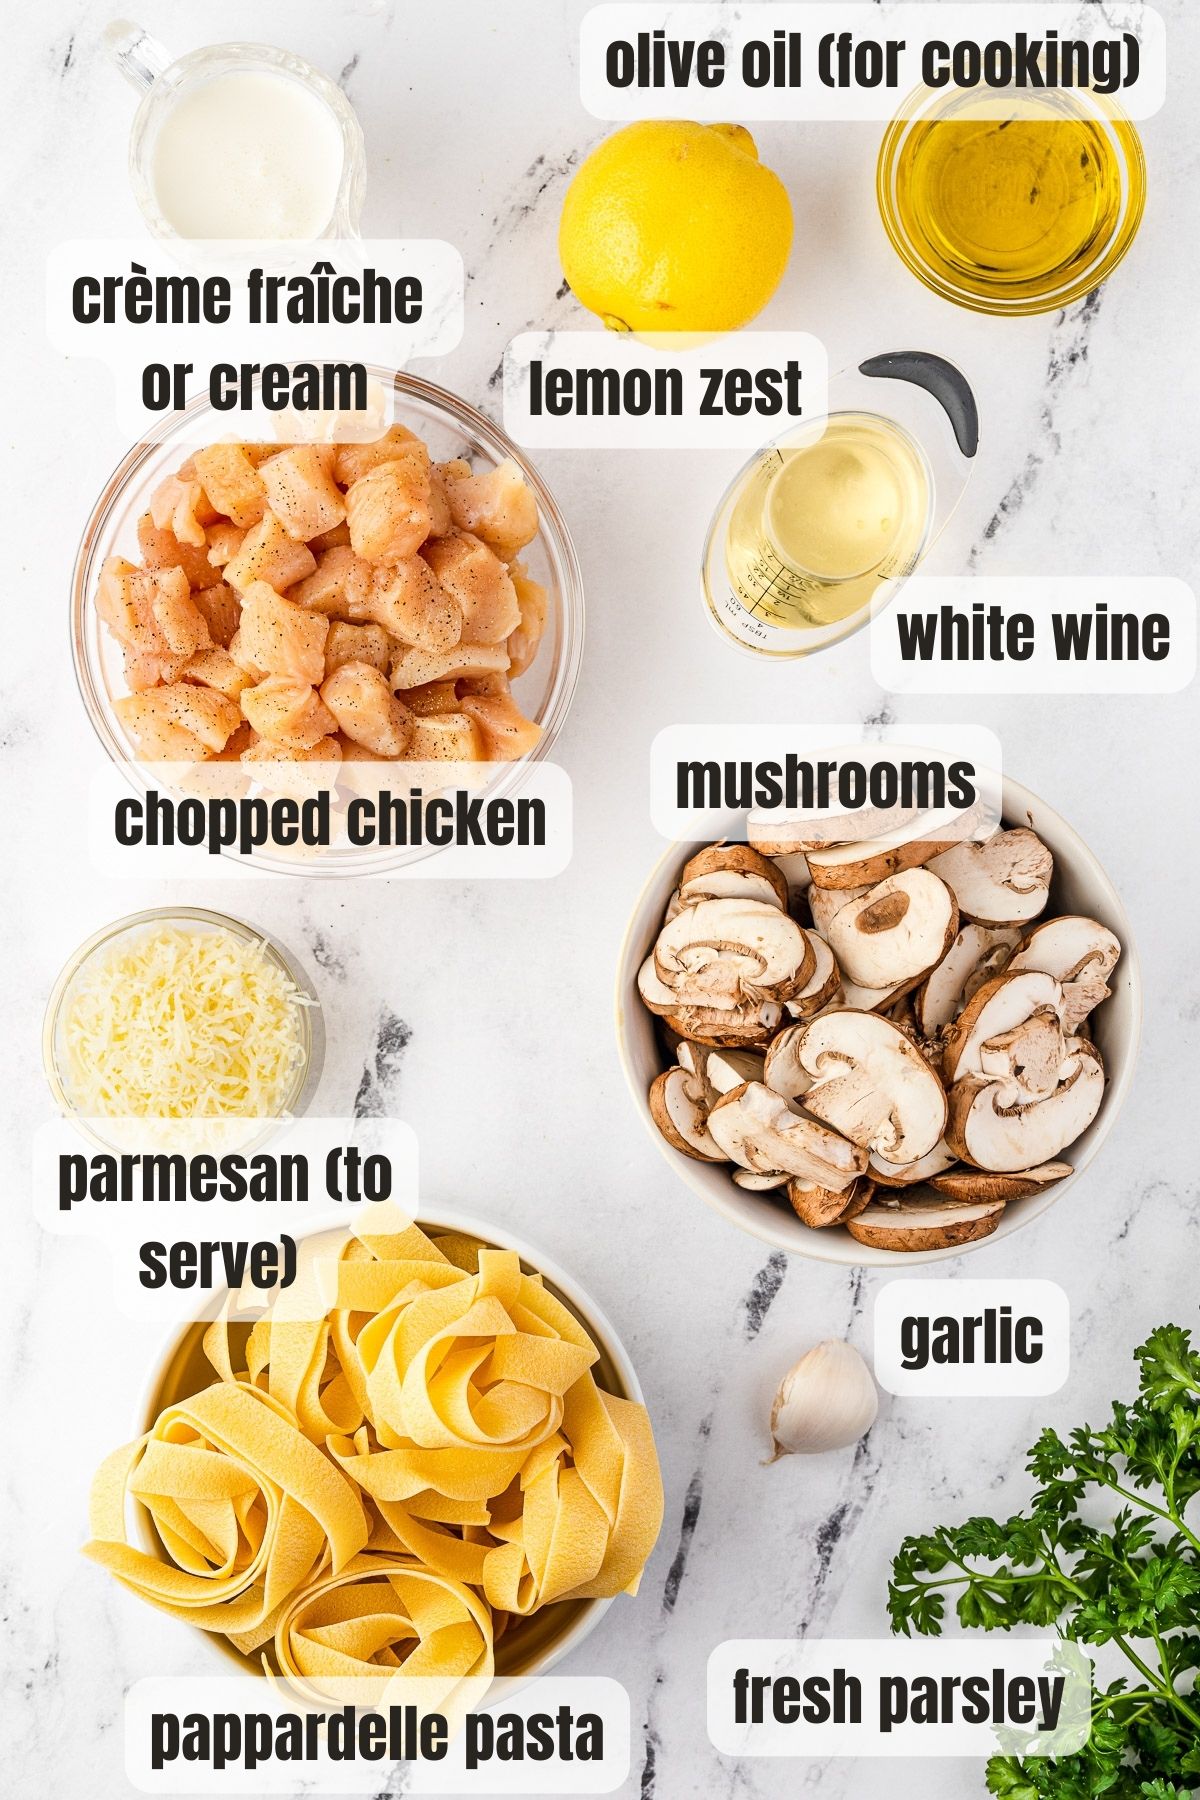 Overhead view of all the ingredients needed for chicken and mushroom pappardelle including pappardelle pasta, fresh parsley, garlic, parmesan, sliced mushrooms, chopped chicken, white wine, olive oil, lemon zest and cream.